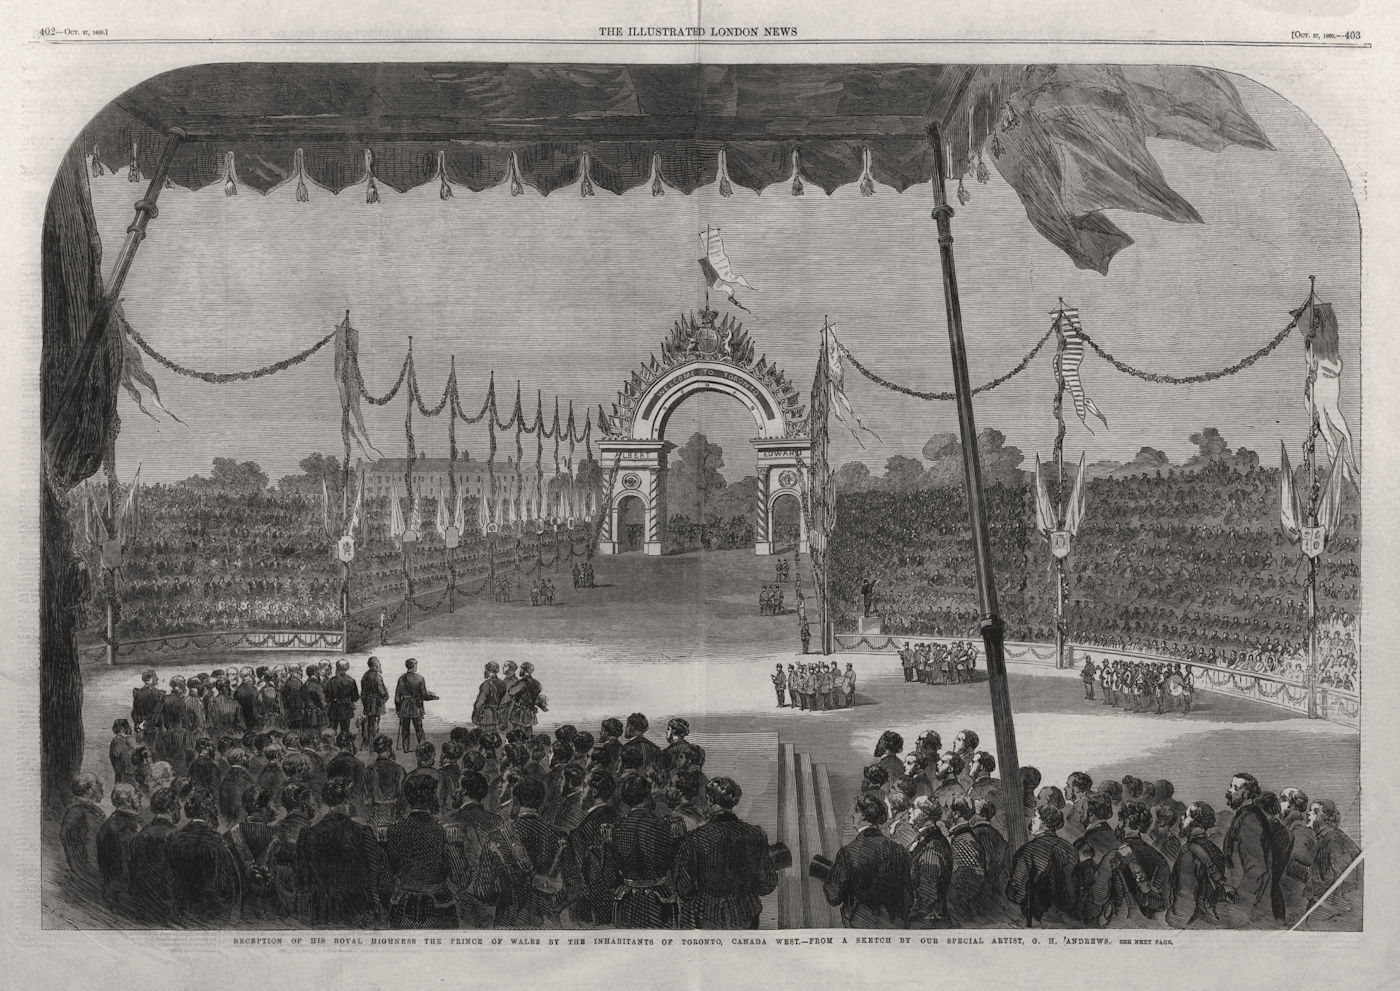 Reception for The Prince of Wales (later King Edward VII), Toronto, Canada 1860